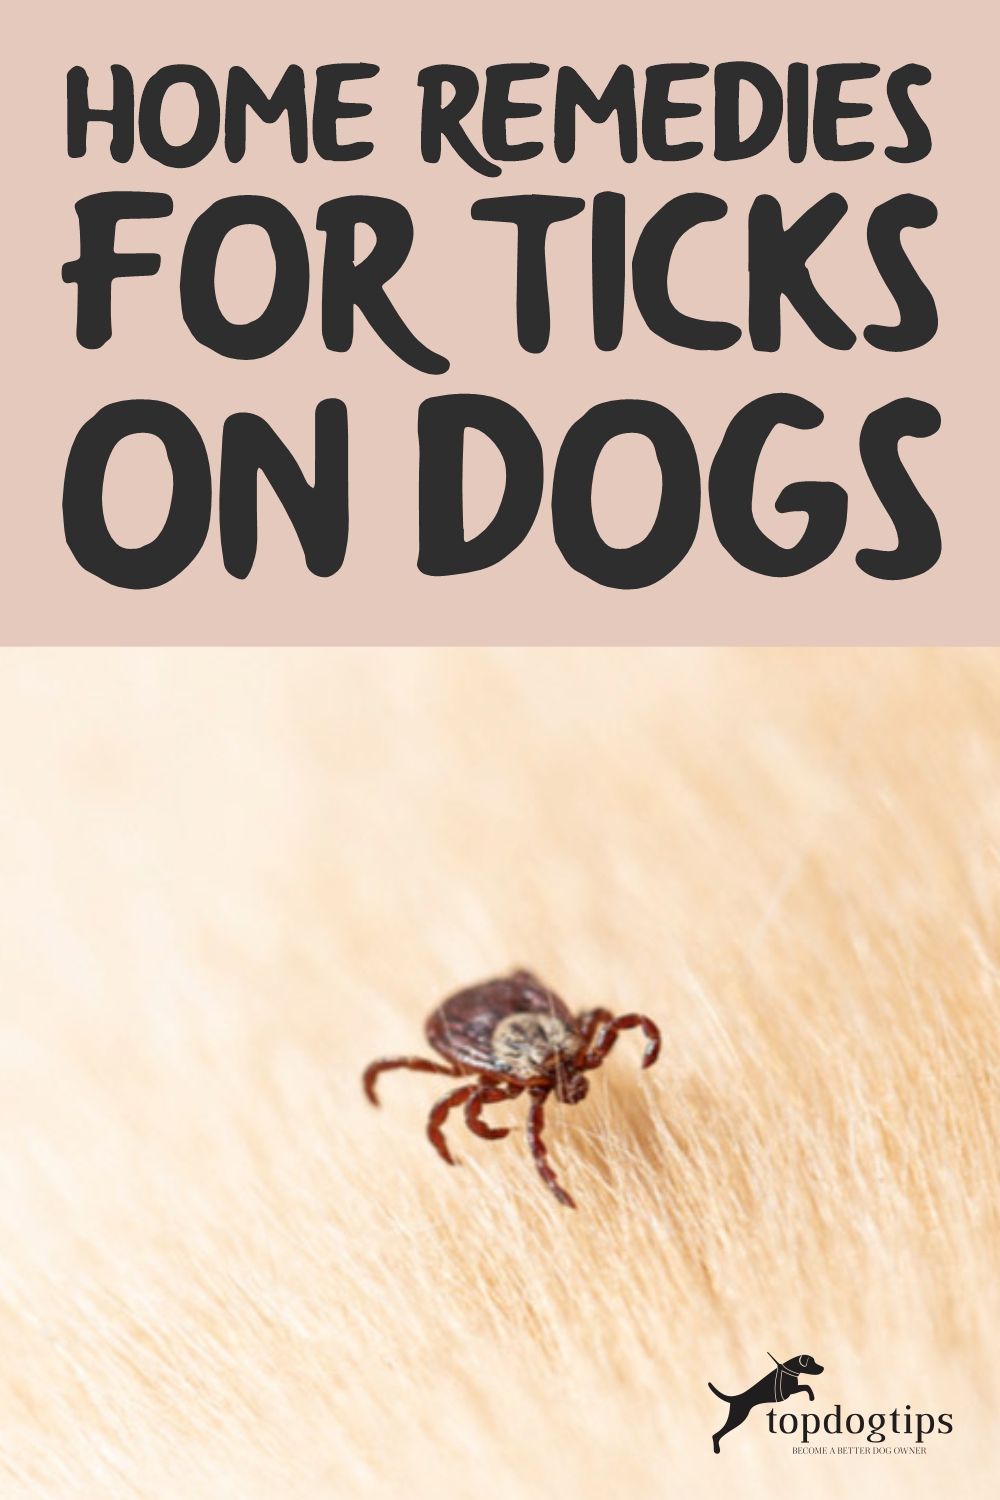 Home Remedies for Ticks on Dogs HD Wallpaper